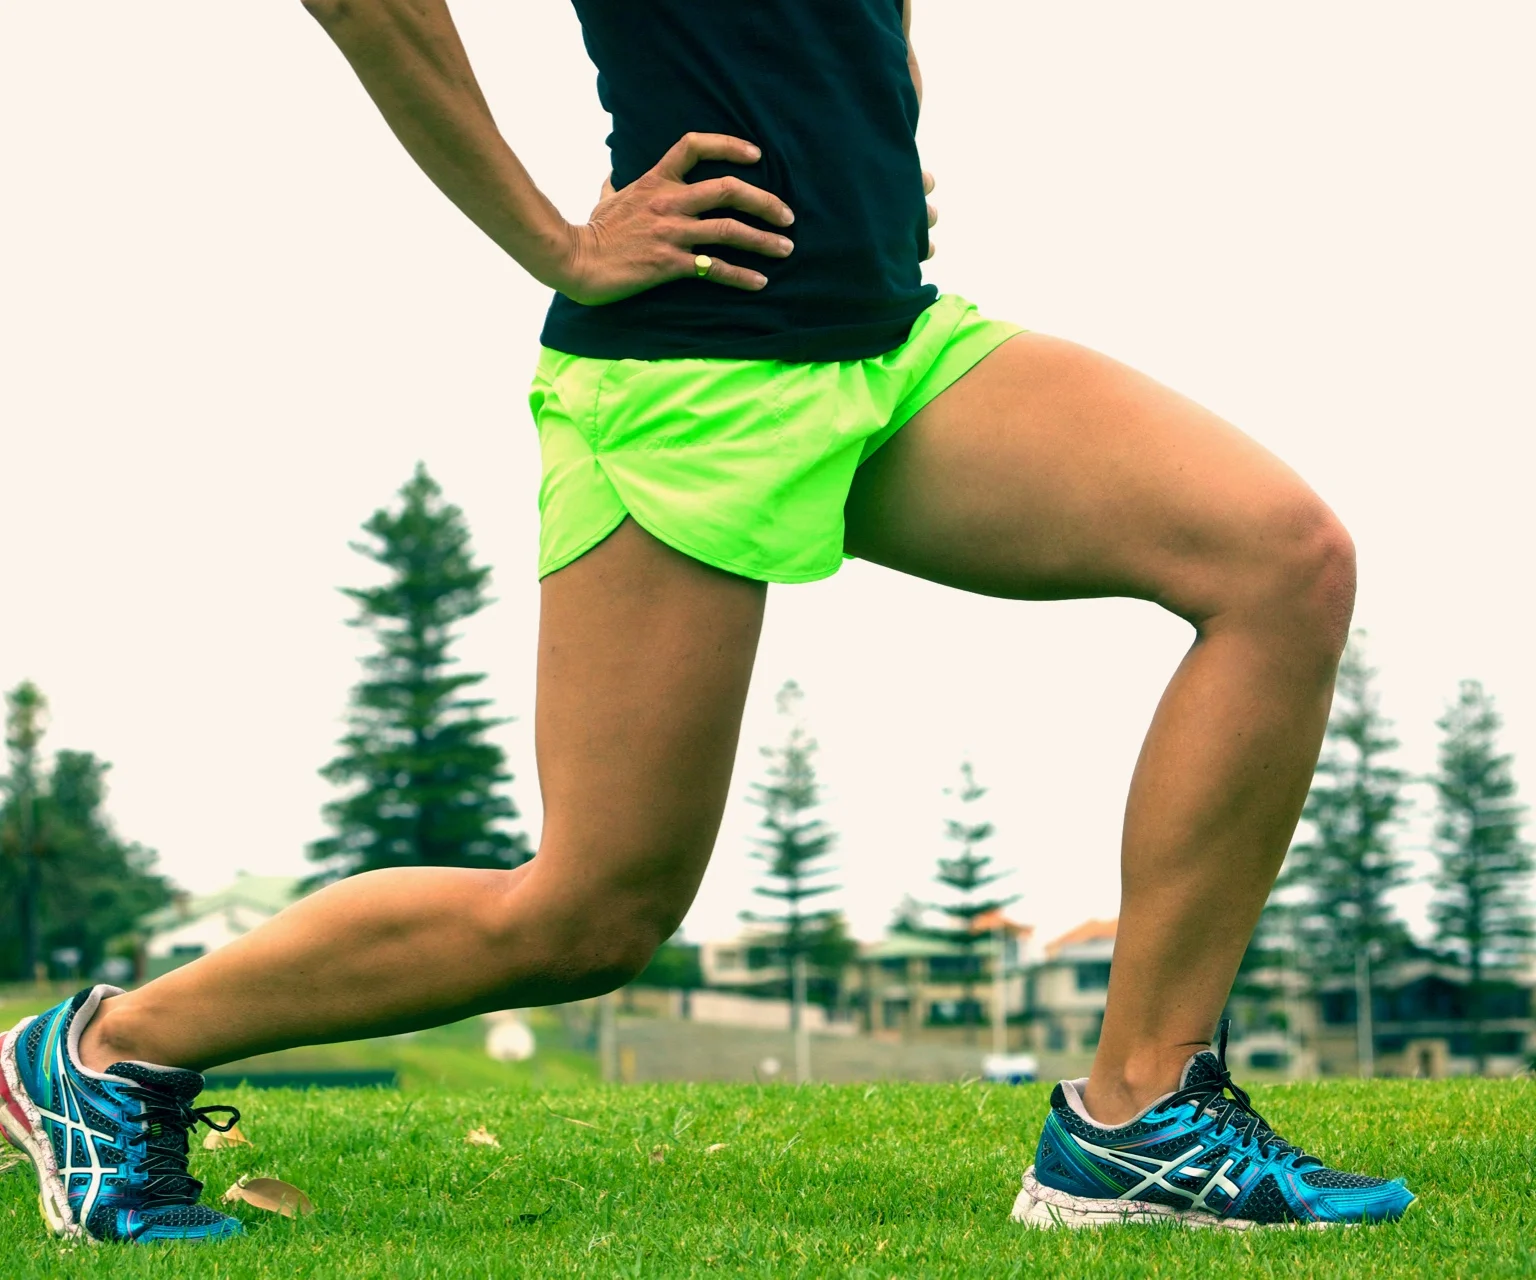 photo - Woman outdoors in a lunge position, showing her quads and hamstrings muscles.